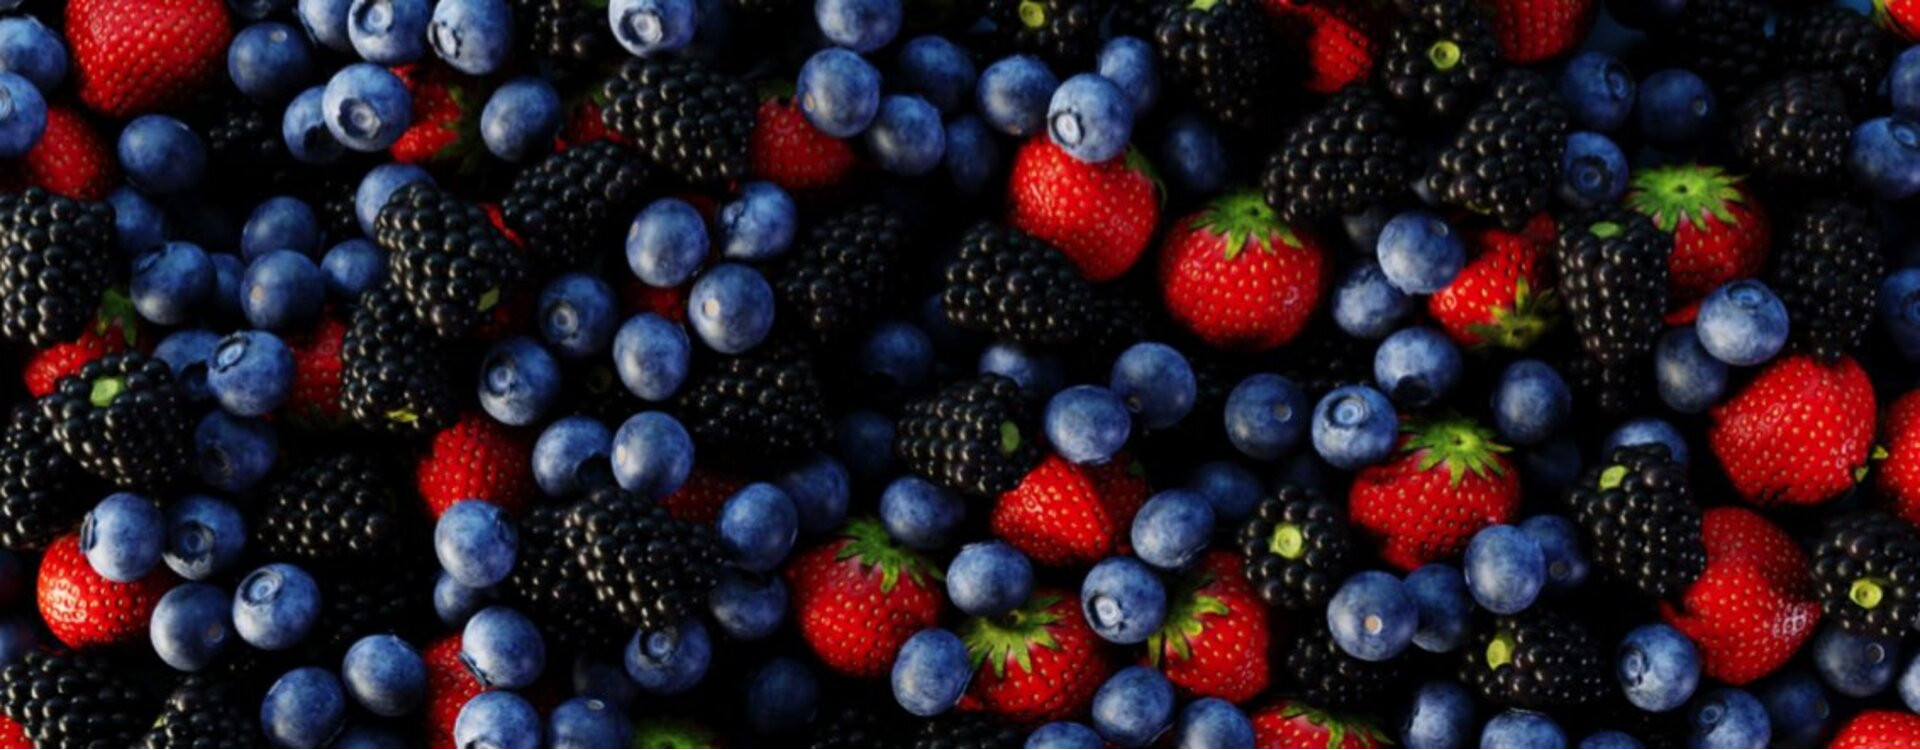 The wild berries of Canada